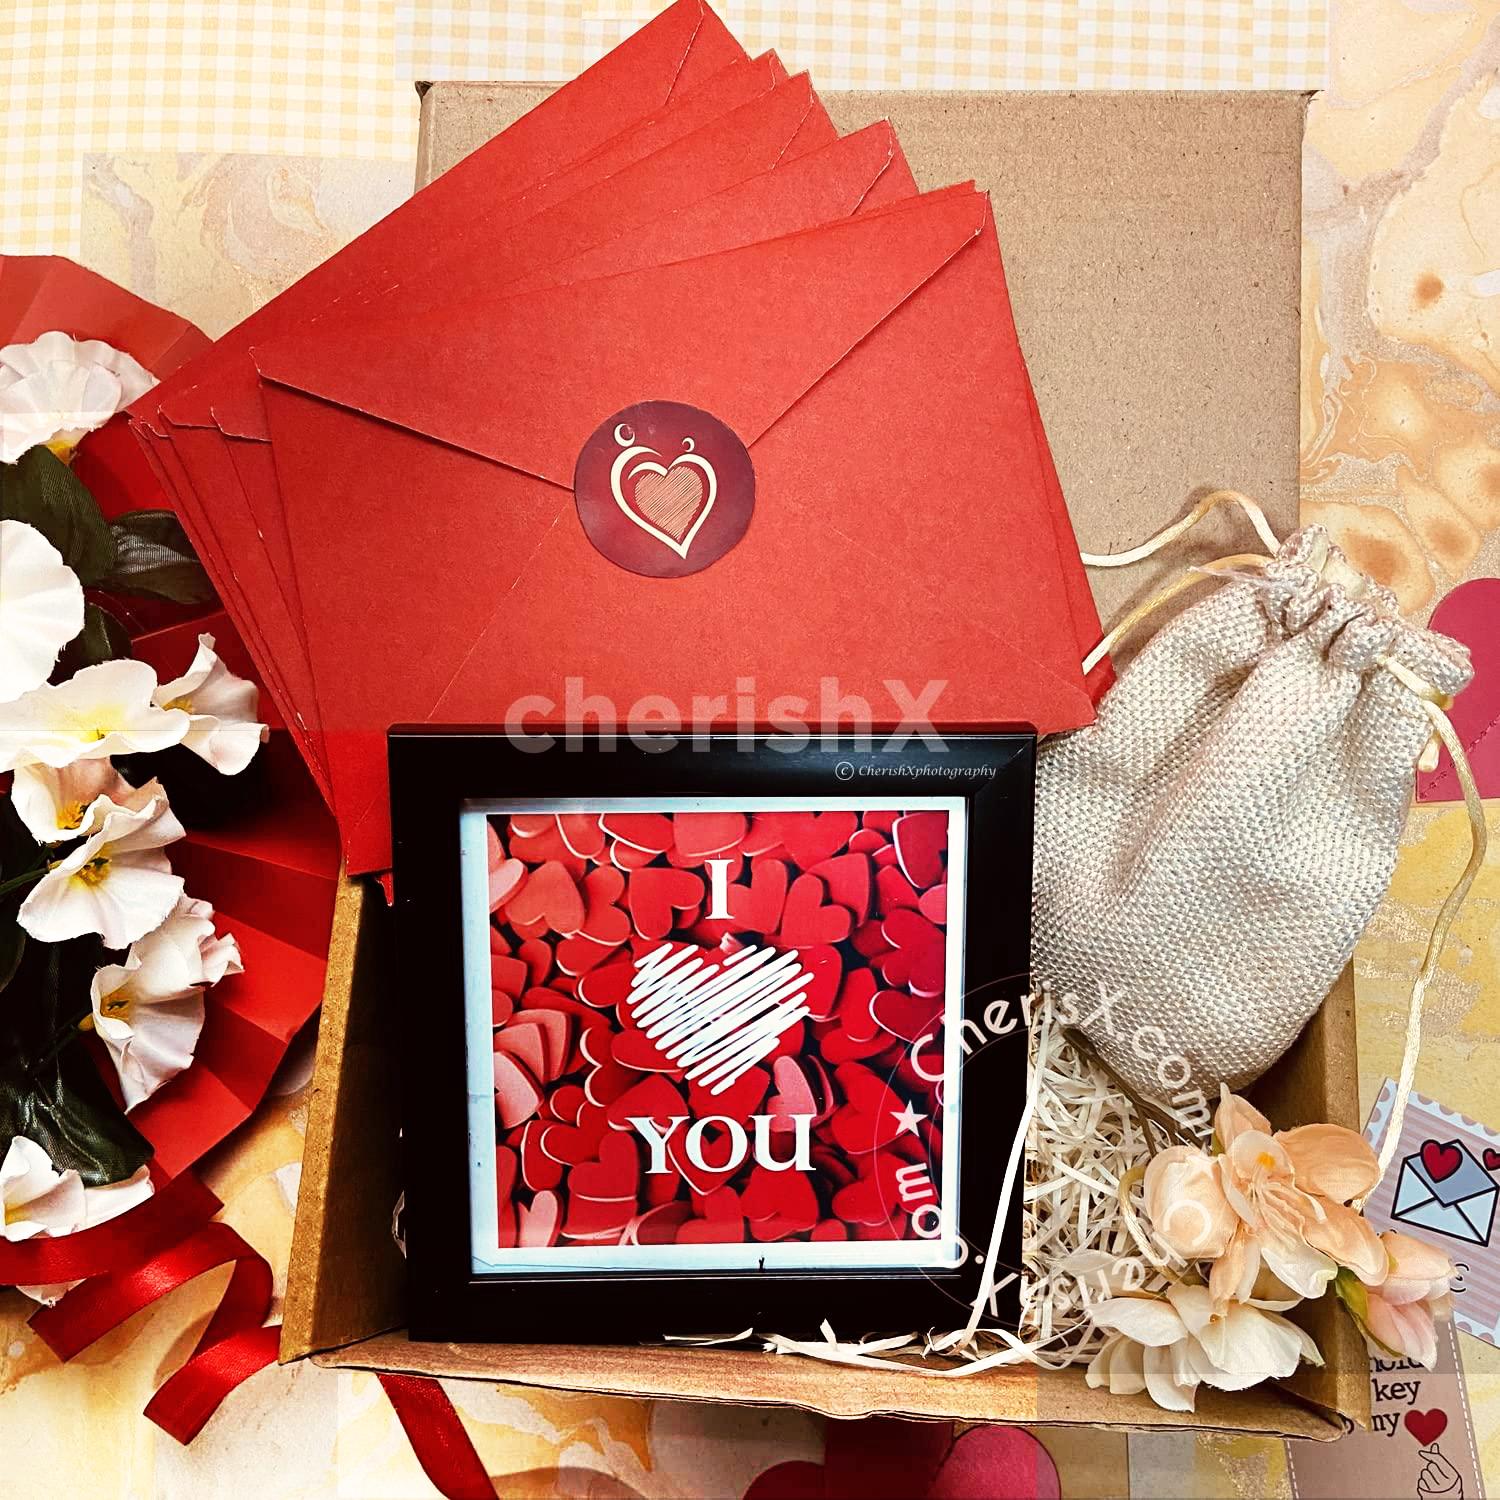 Promise Day Gifts & Surprises Delivery in Sonari Pune for Valentine's